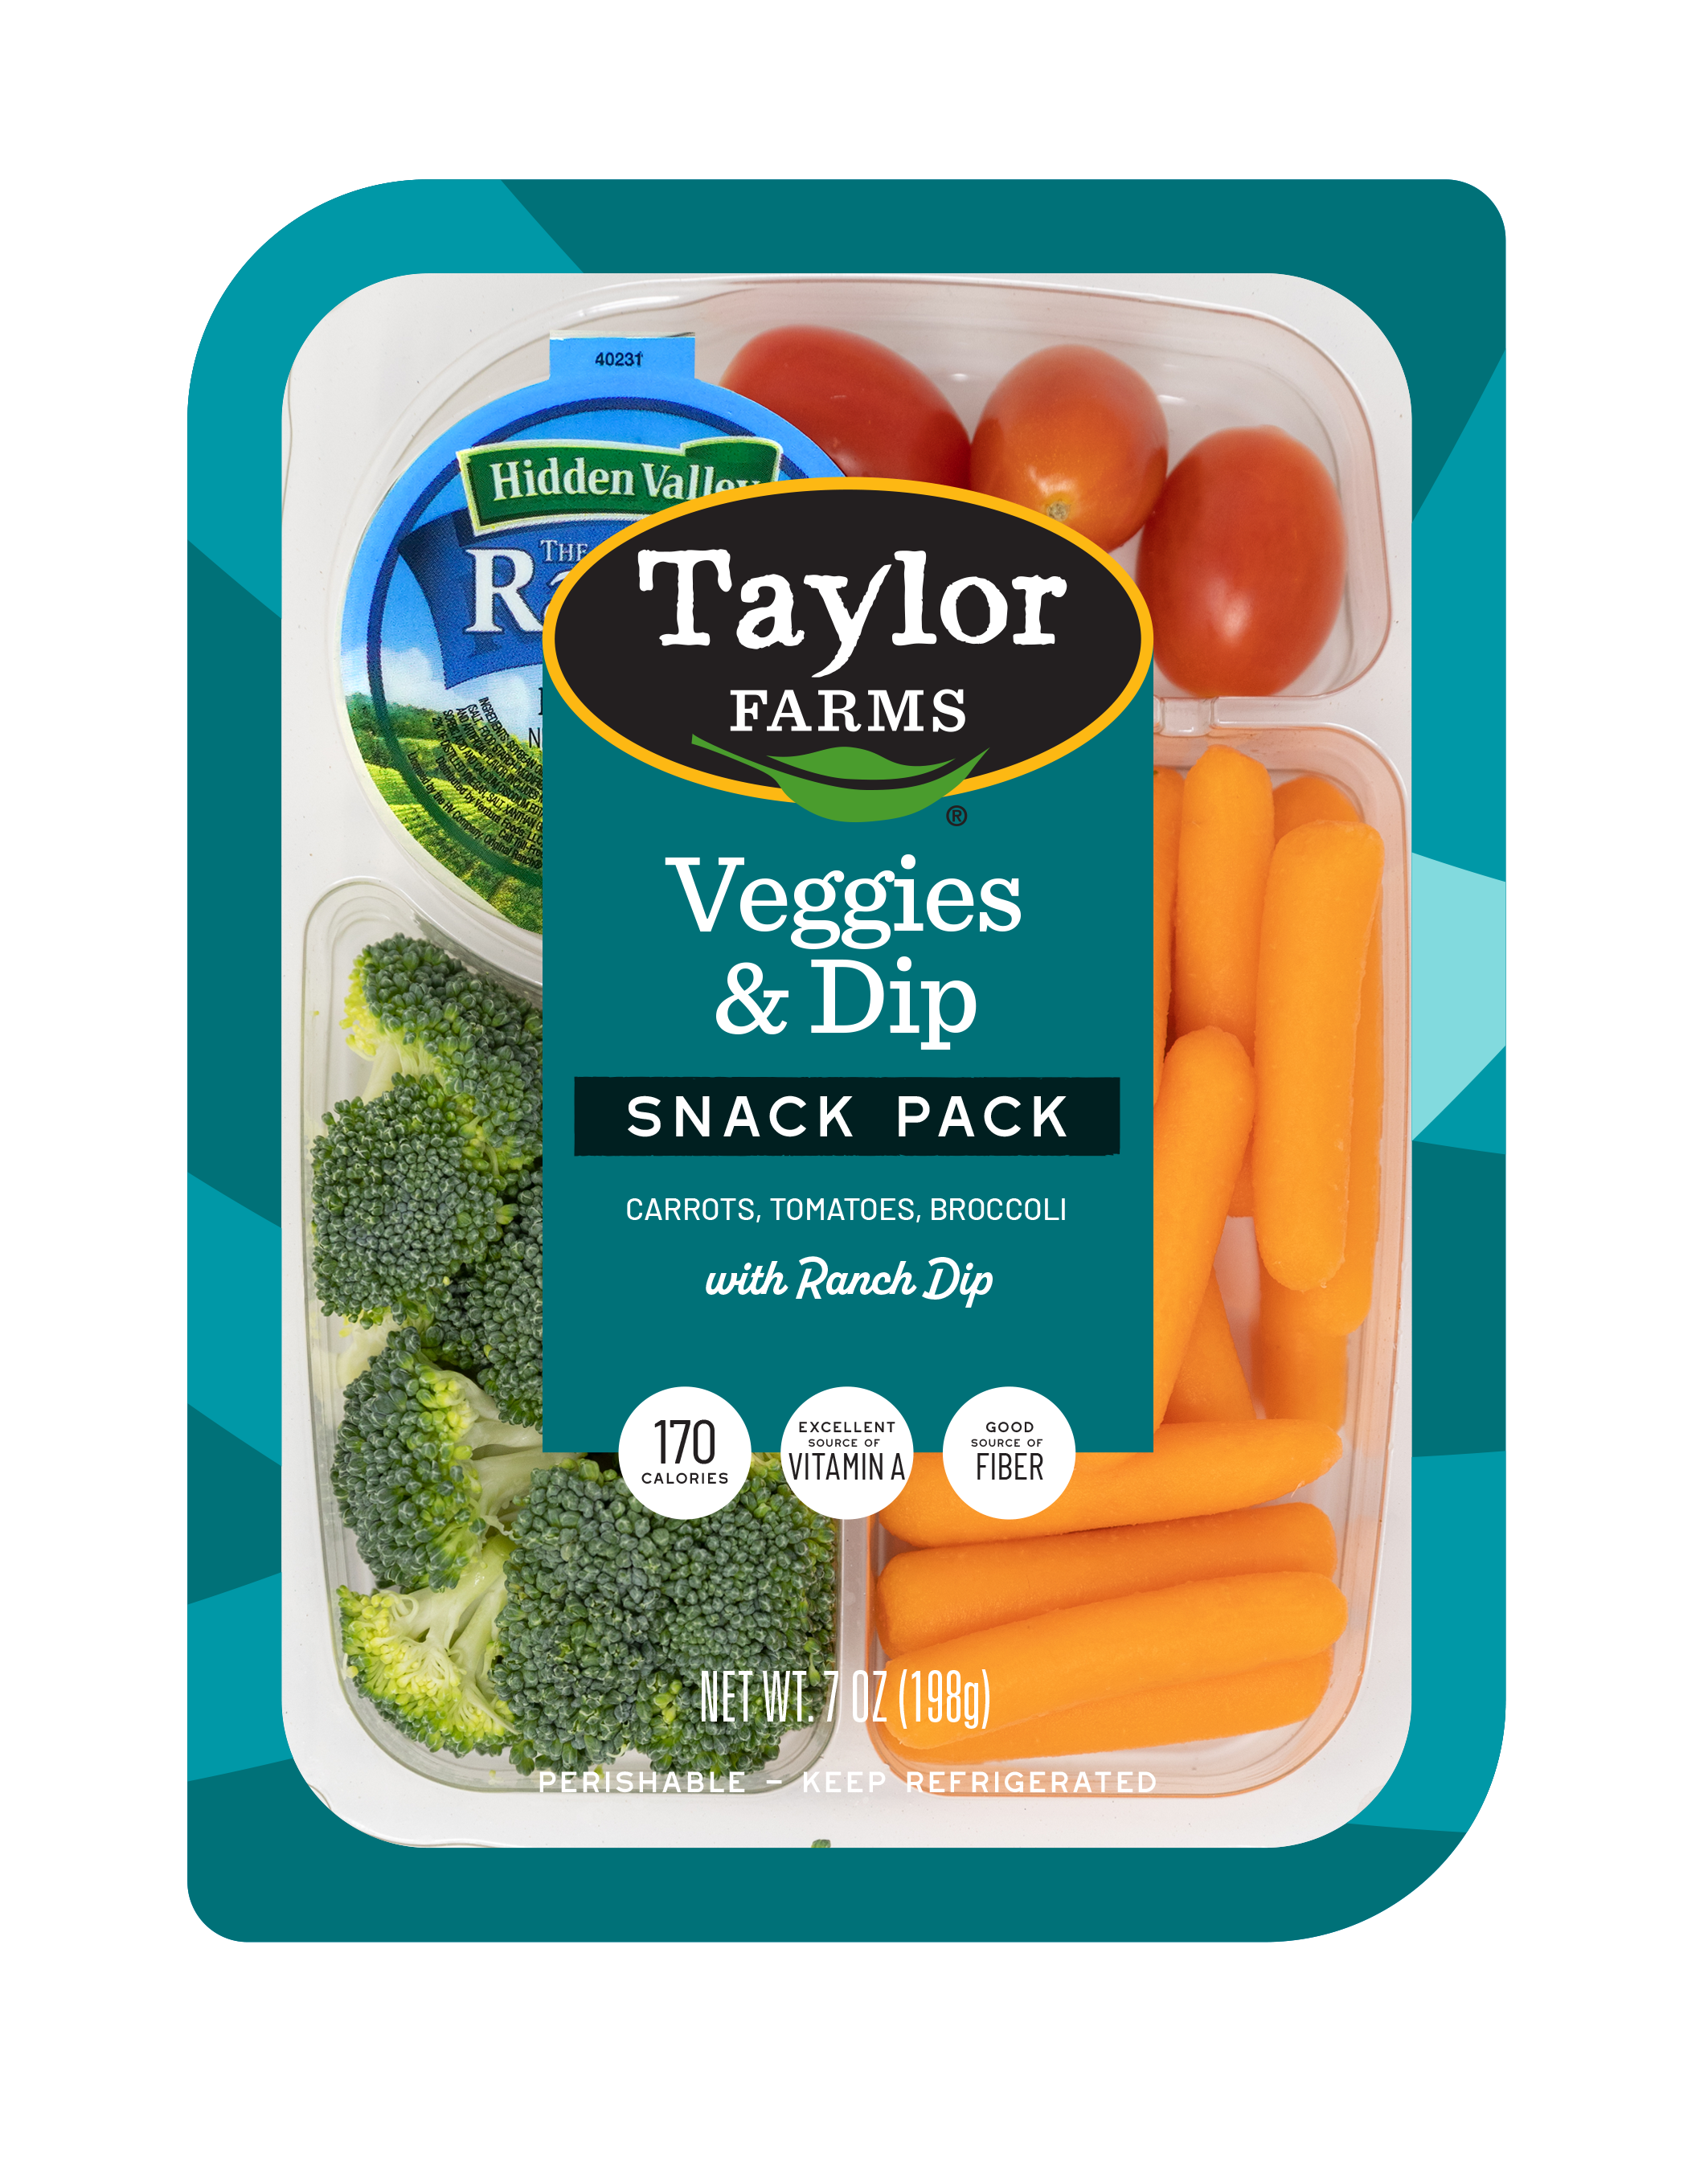 The Taylor Farms Veggies & Dip package, showing celery stalks, baby carrots, grape tomatoes, and Hidden Valley Ranch Dip.